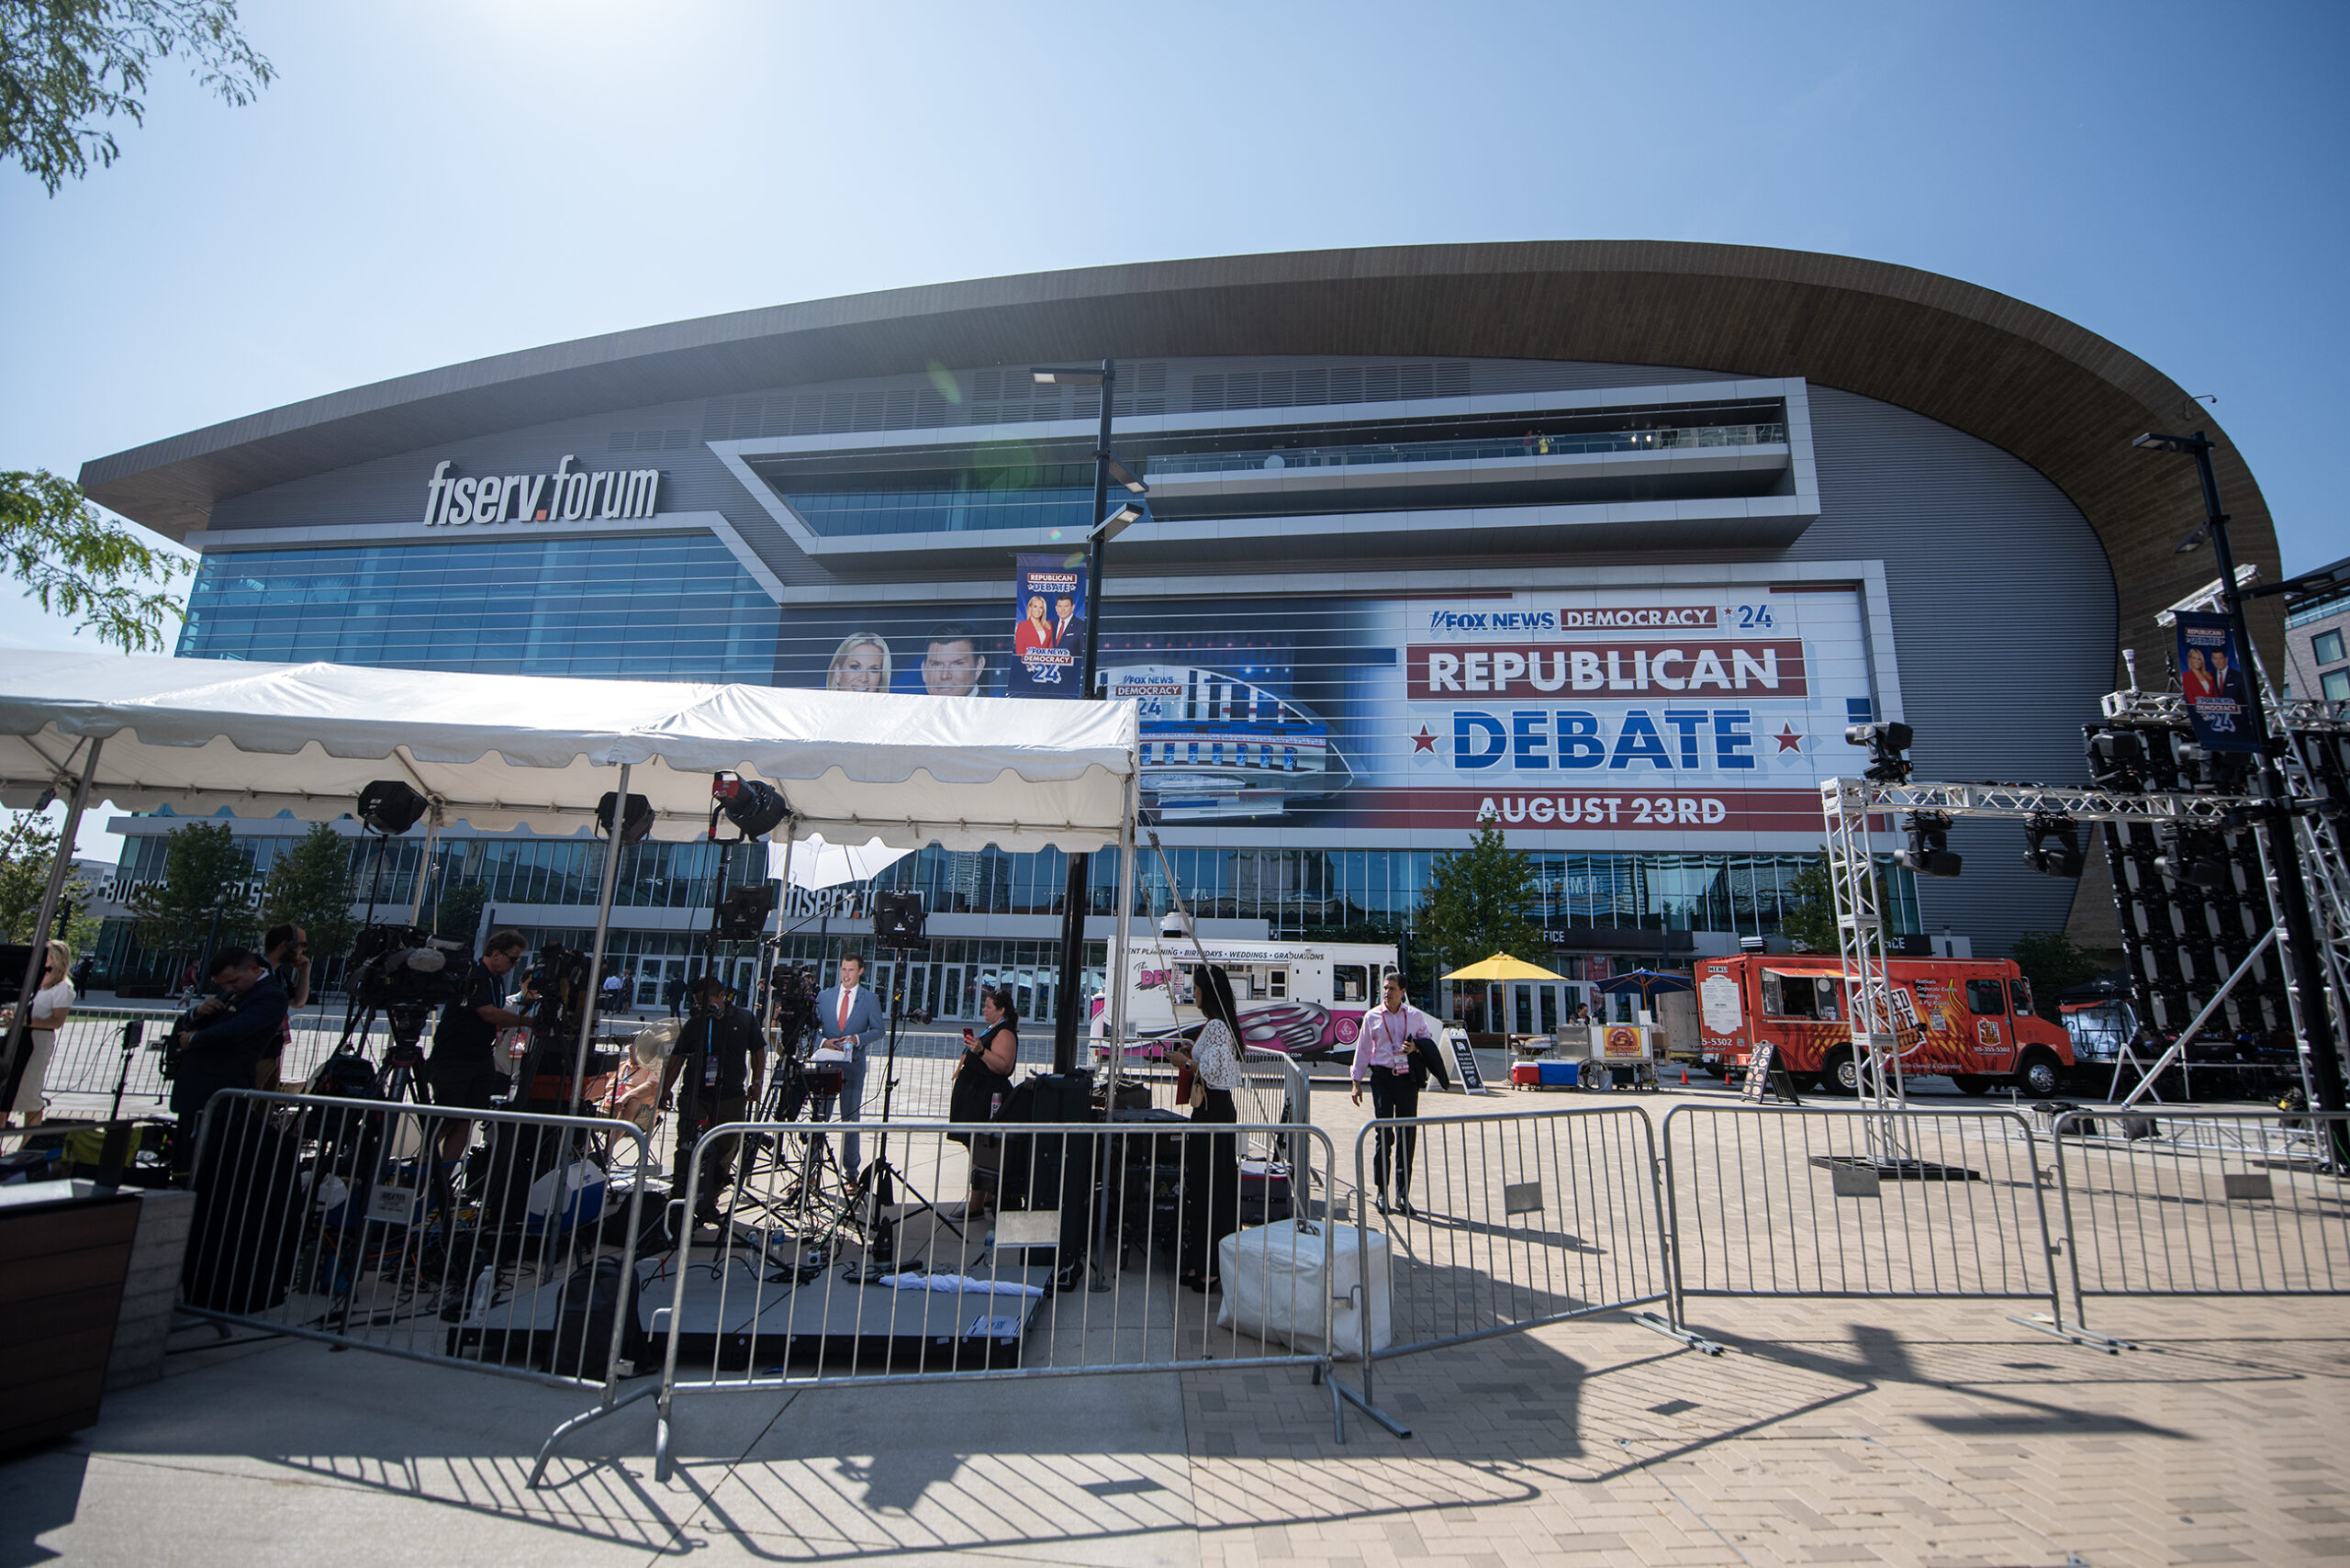 The Fiserv Forum has signage for the debate on the walls.